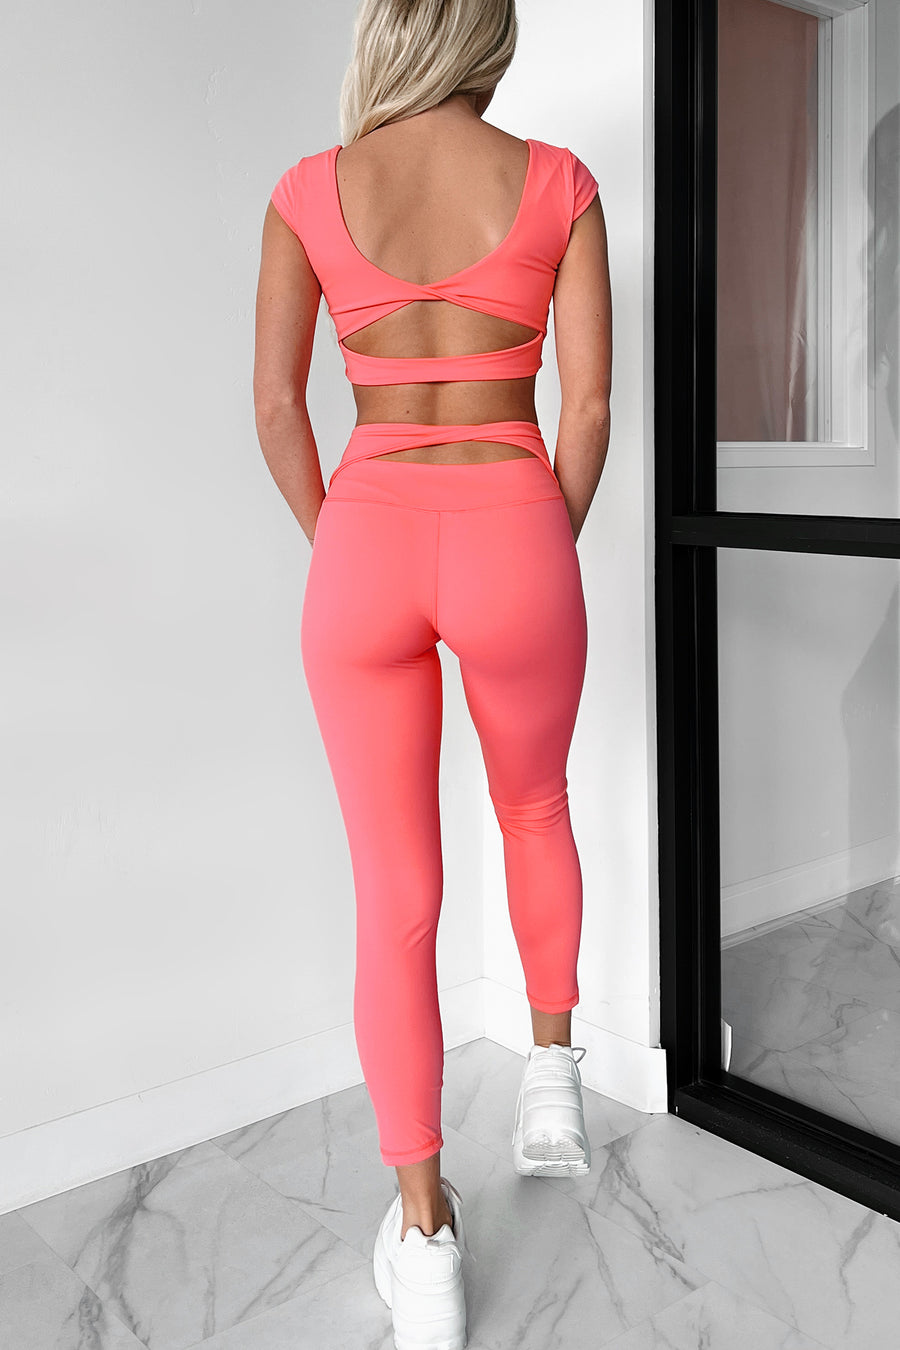 Empowering Myself Cut-Out Active Set (Pink)